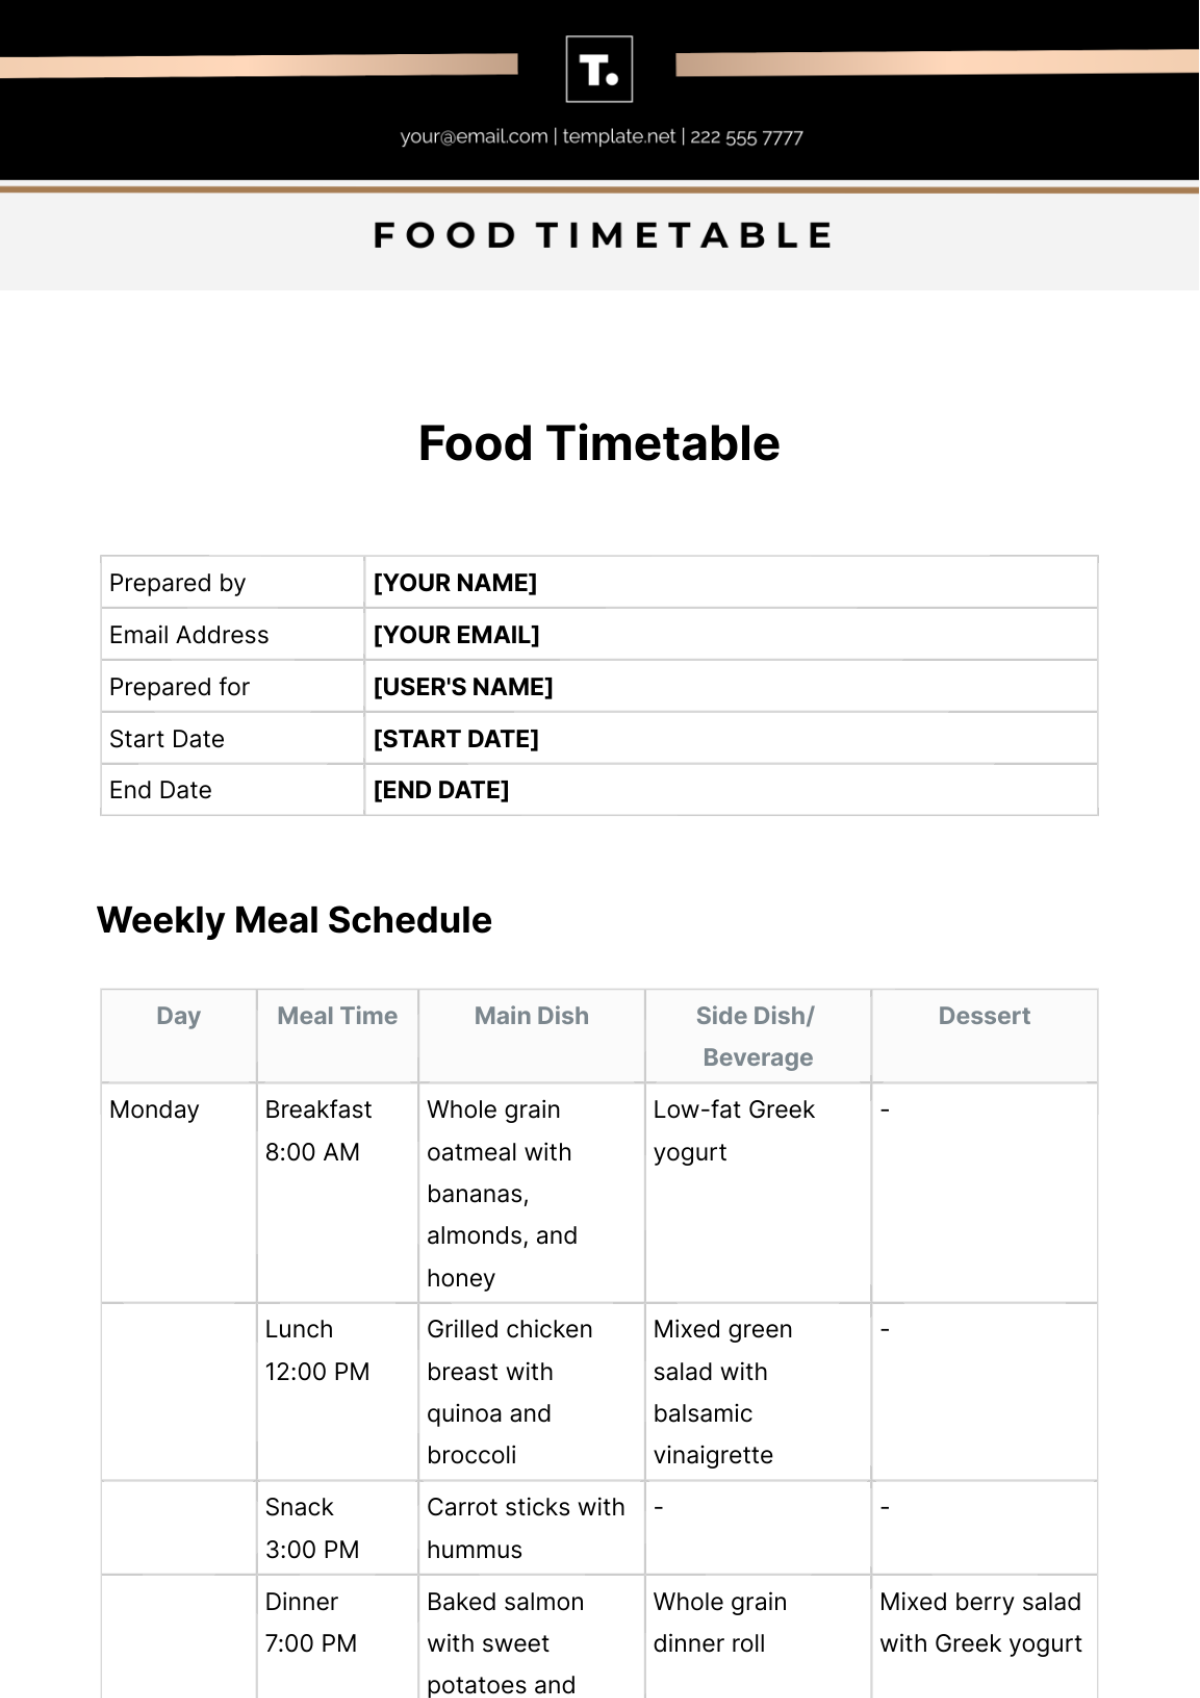 Food Timetable Template